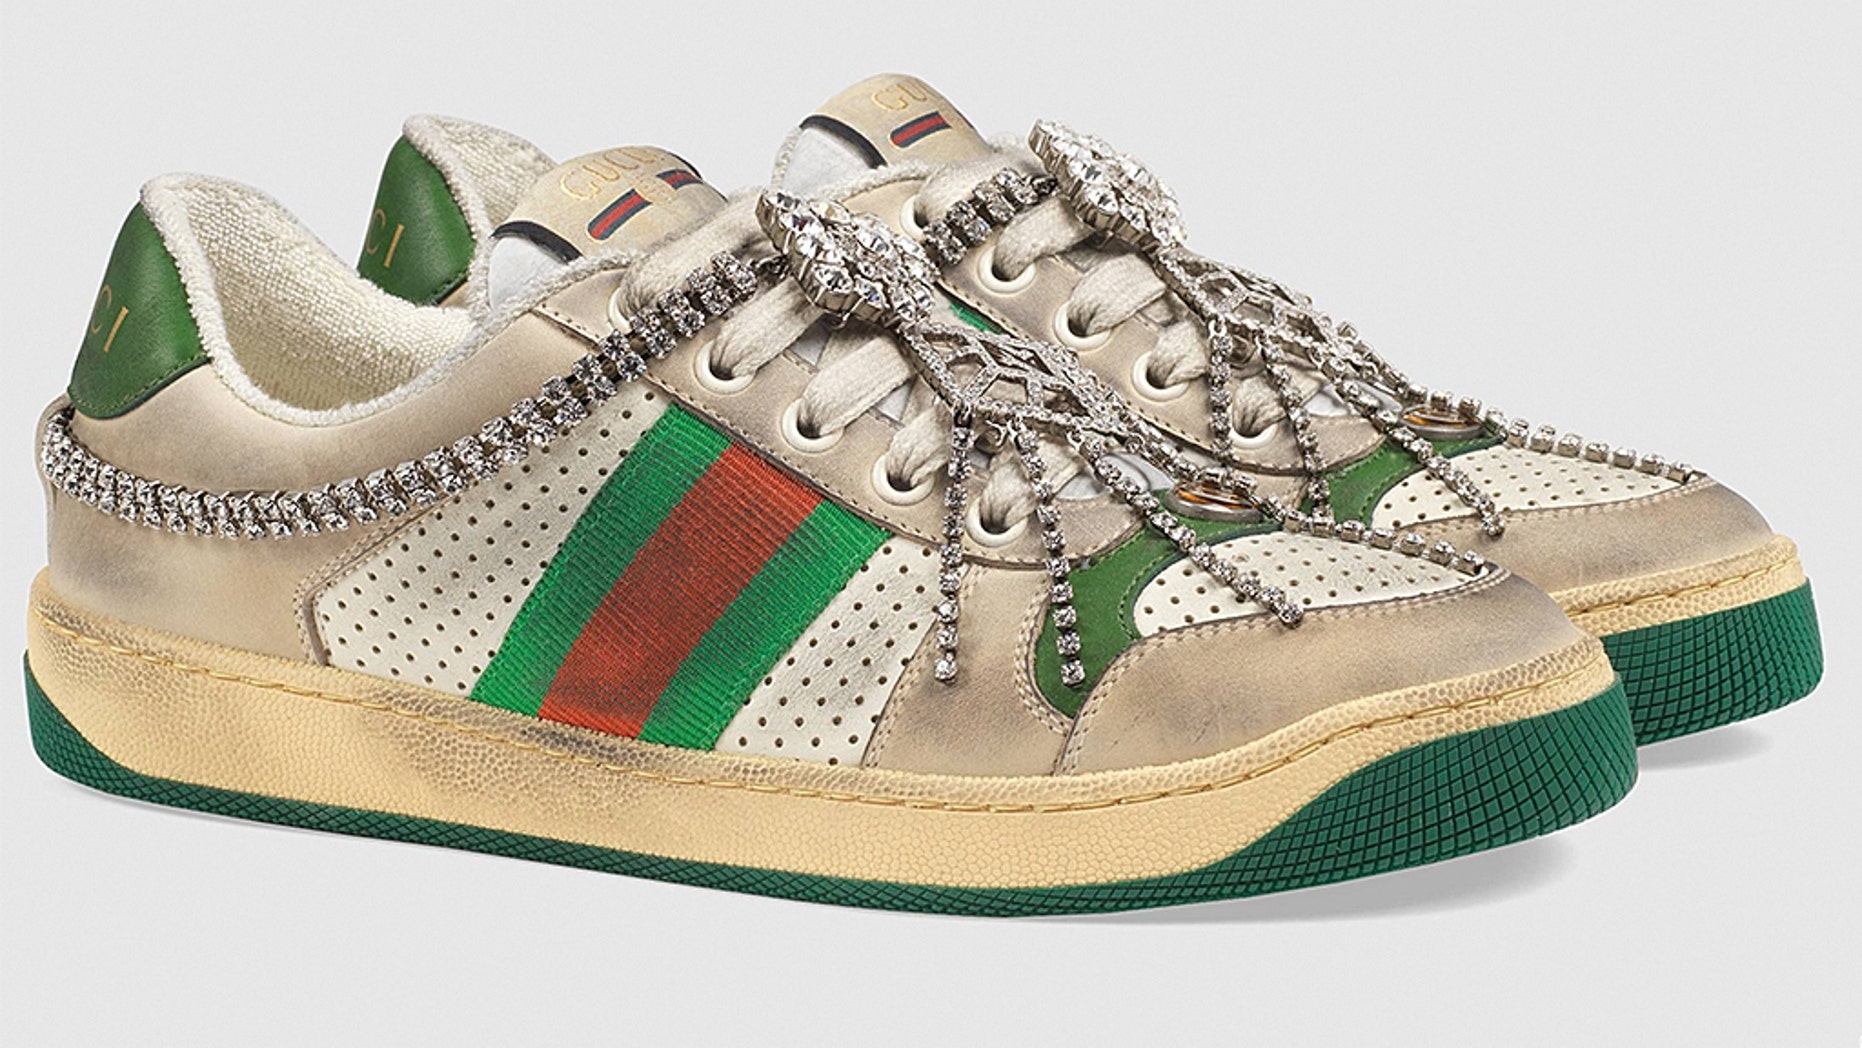 Gucci’s $900 ‘dirty’ sneakers slammed on Twitter – Hot Prime NEWS